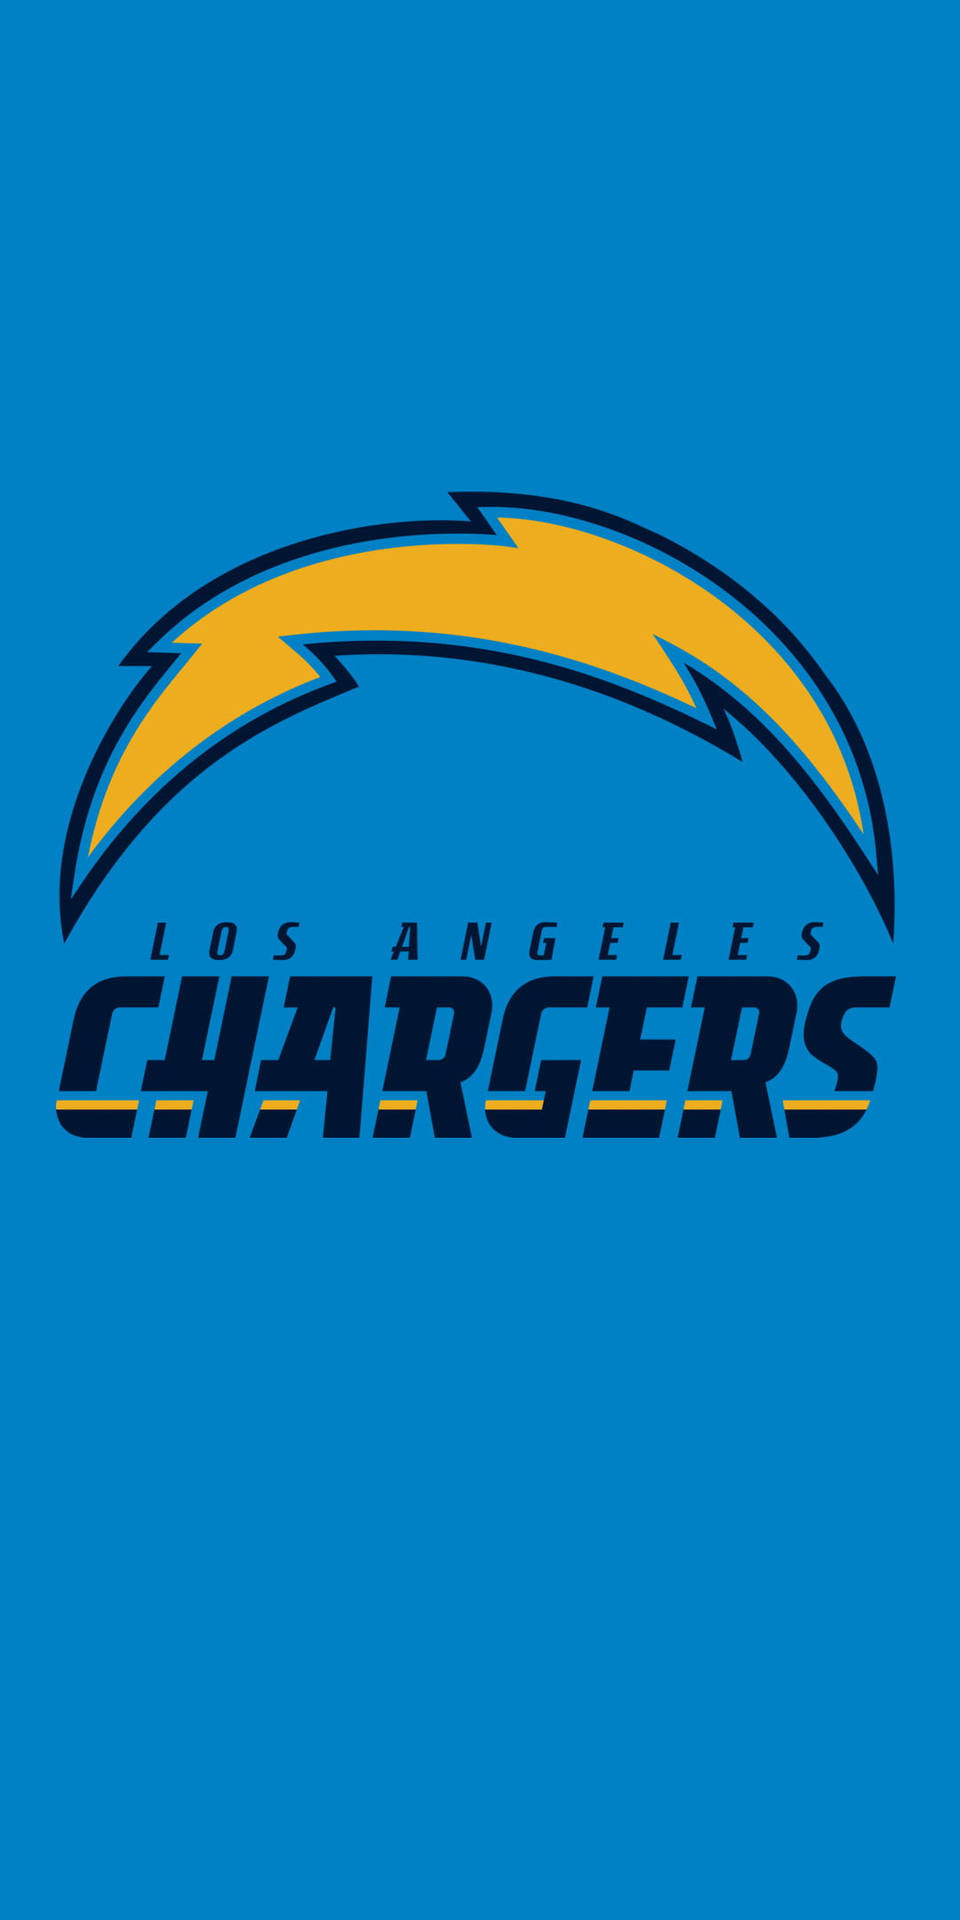 Losangeles Chargers Nfl Iphone Wallpaper. (los Angeles Chargers Nfl Iphone-hintergrundbild) Wallpaper